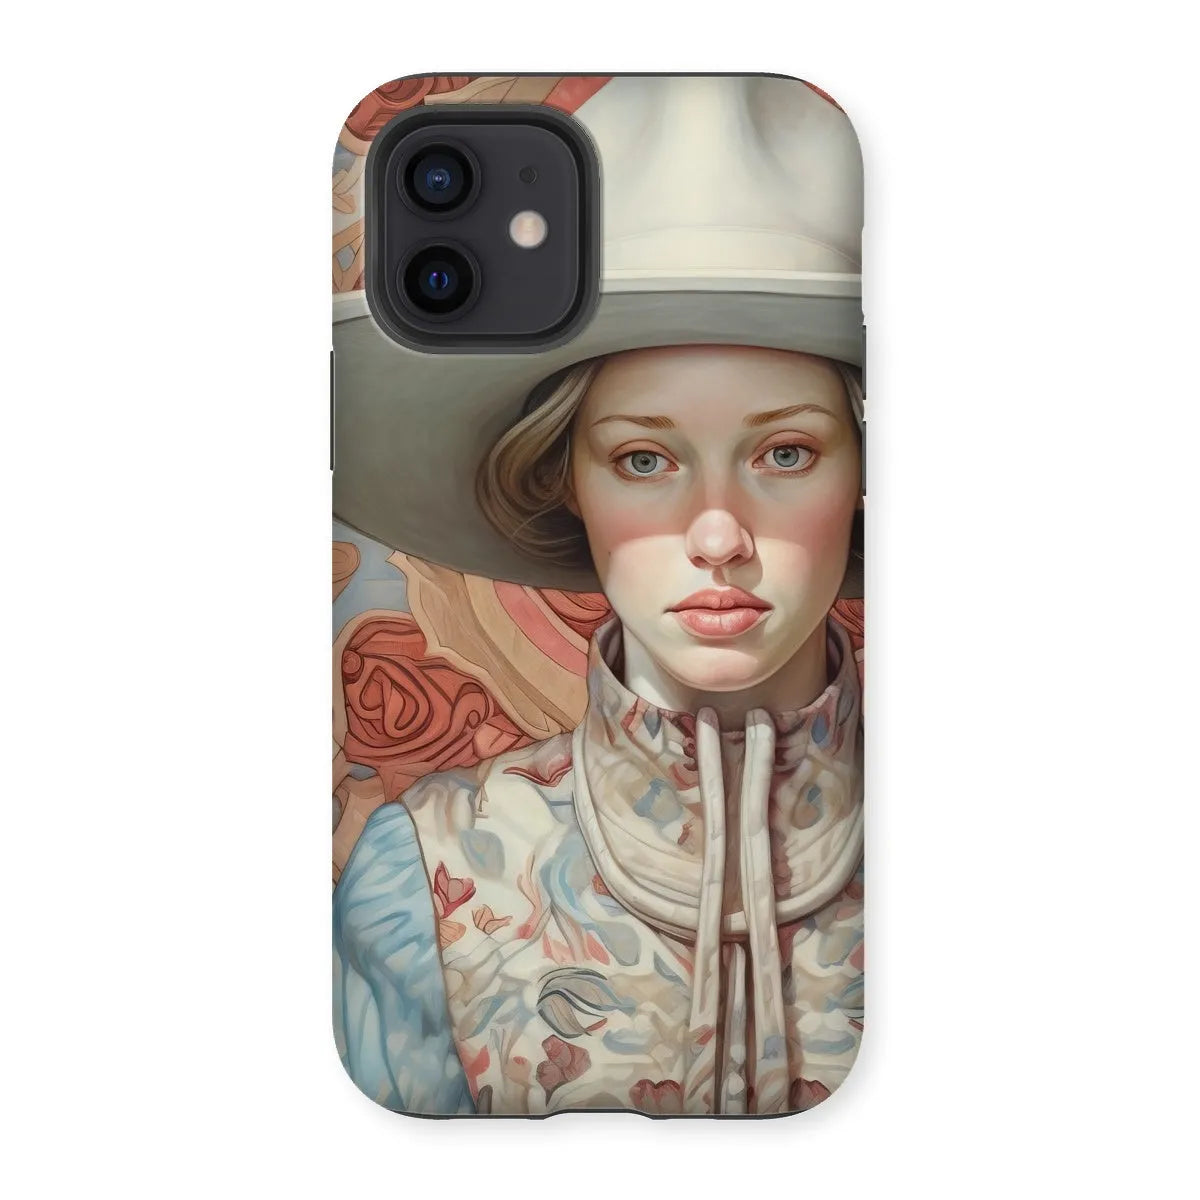 Lottie The Lesbian Cowgirl - Sapphic Art Phone Case - Iphone 12 / Matte - Mobile Phone Cases - Aesthetic Art